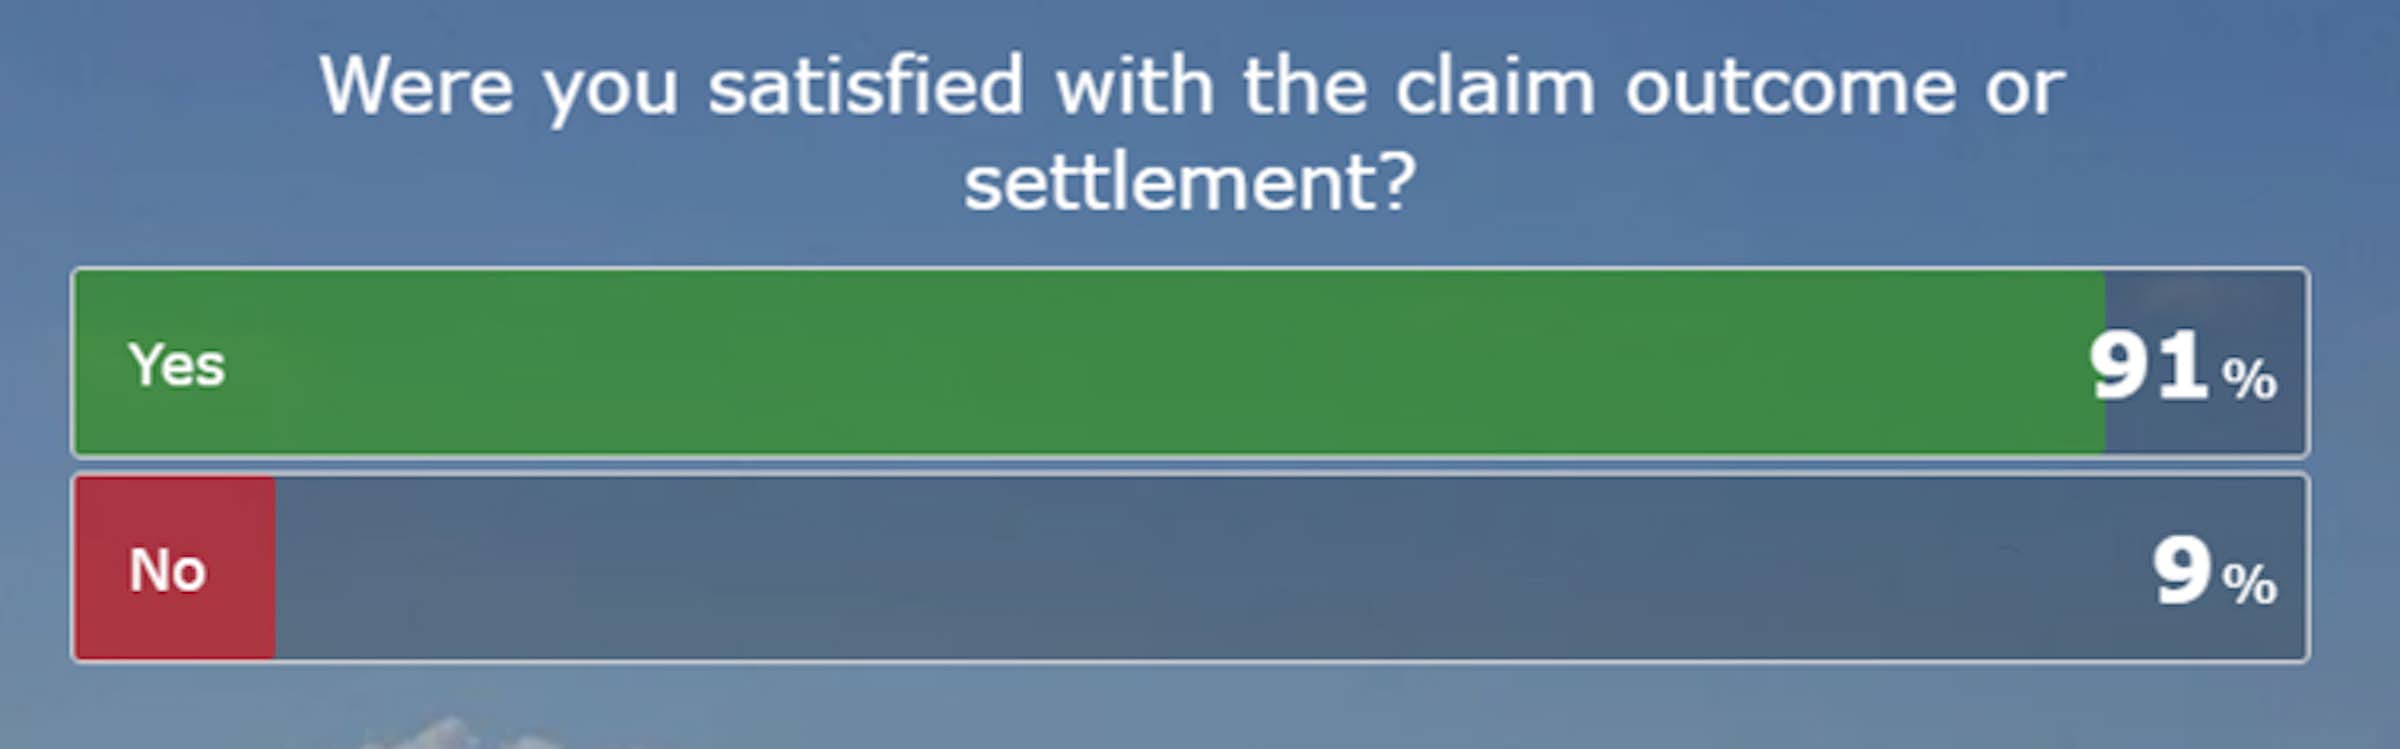 Client's Feedback on Claims